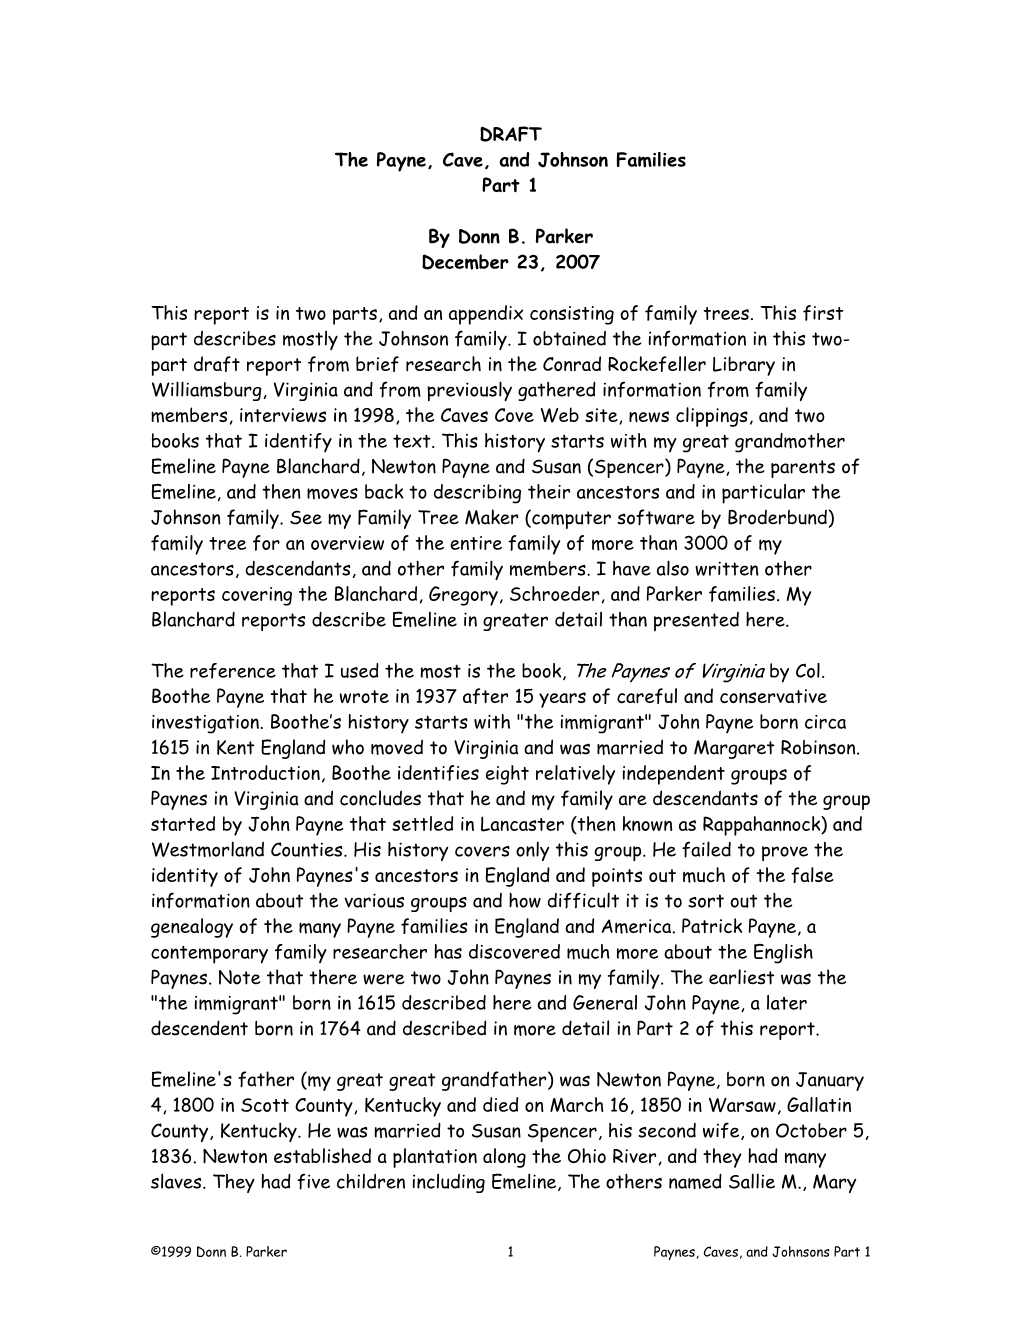 DRAFT the Payne, Cave, and Johnson Families Part 1 by Donn B